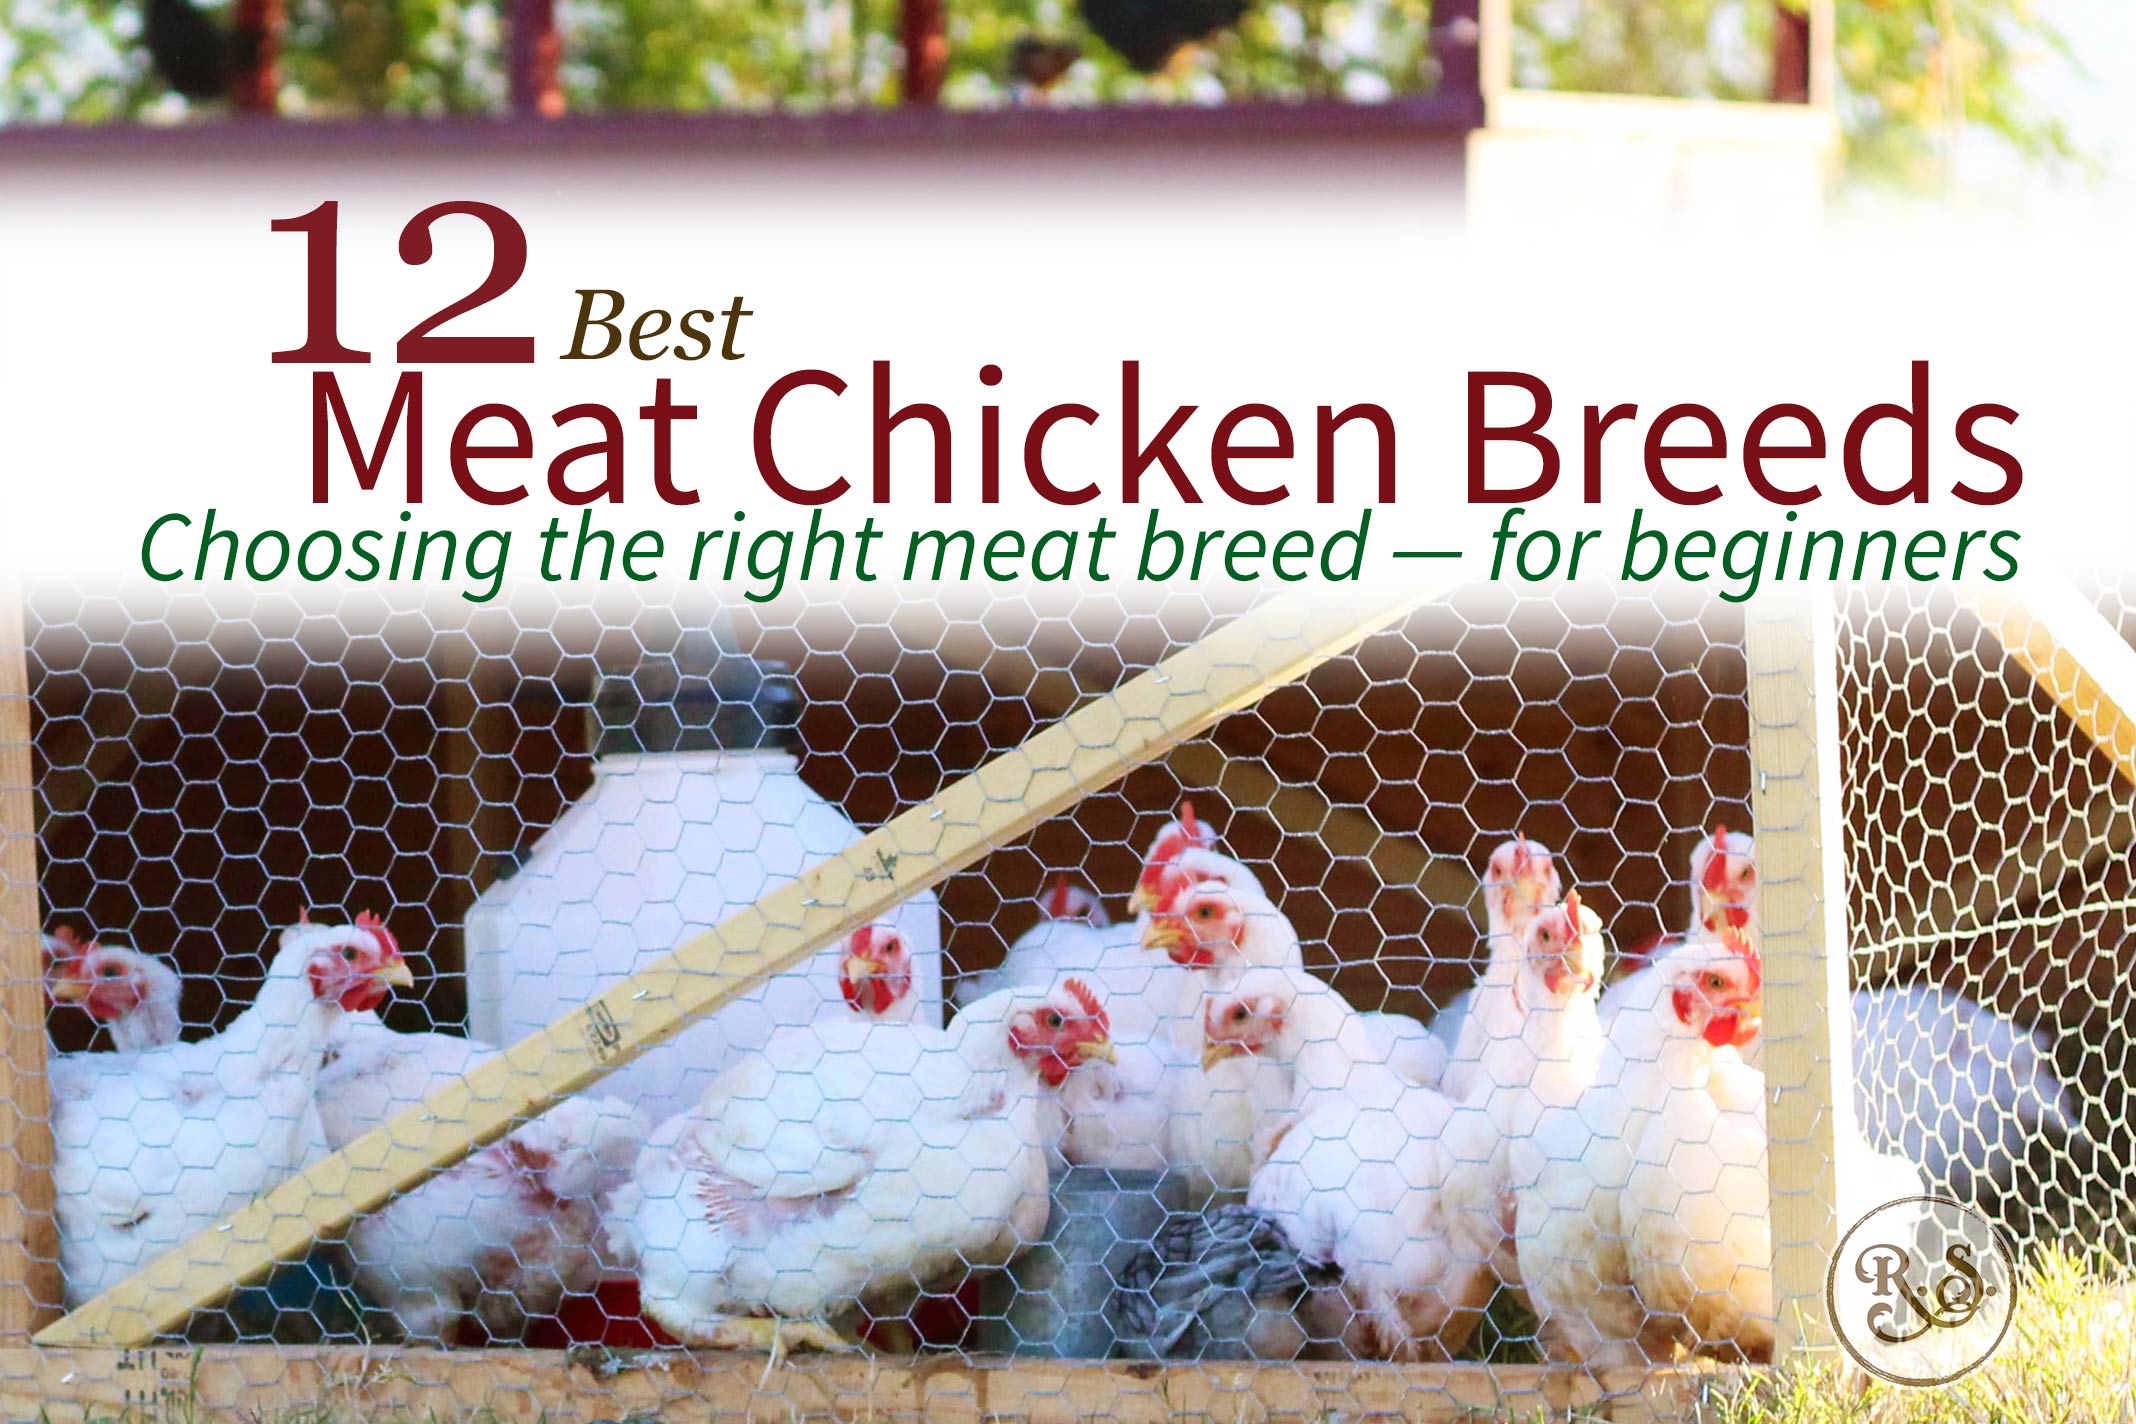 Here are 12 of the best meat chicken breeds for raising on your homestead. A great list for beginners who are looking to raise broilers. Both cross-bred & heritage breeds are compared here.